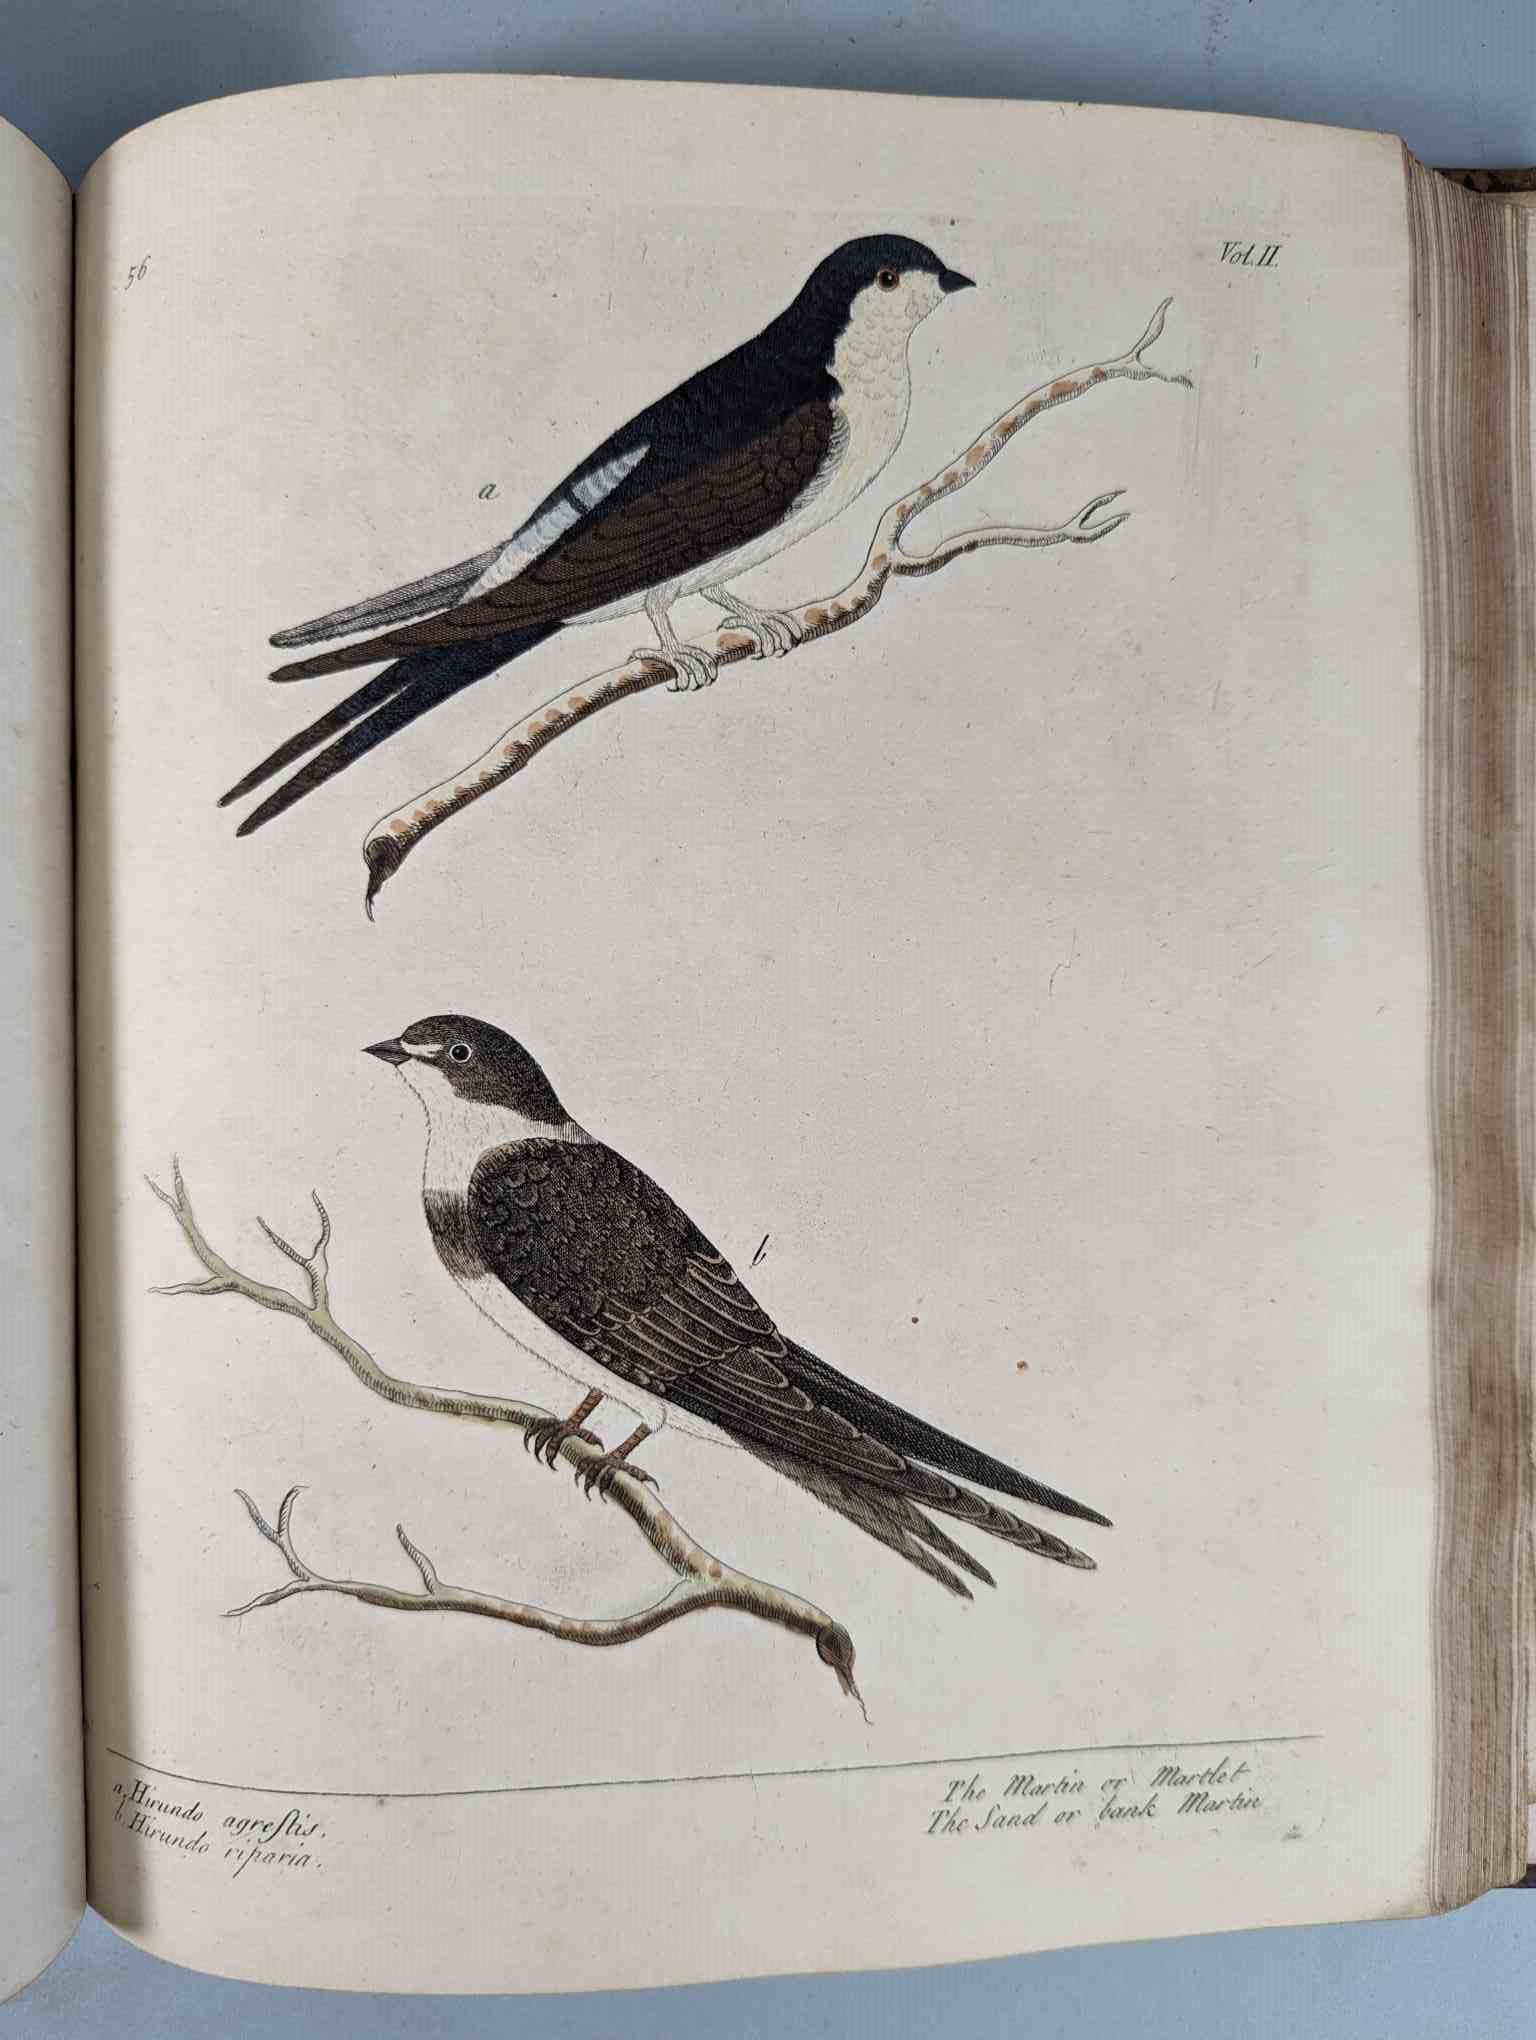 ALBIN, Eleazar. A Natural History of Birds, to which are added, Notes and Observations by W. - Image 160 of 208